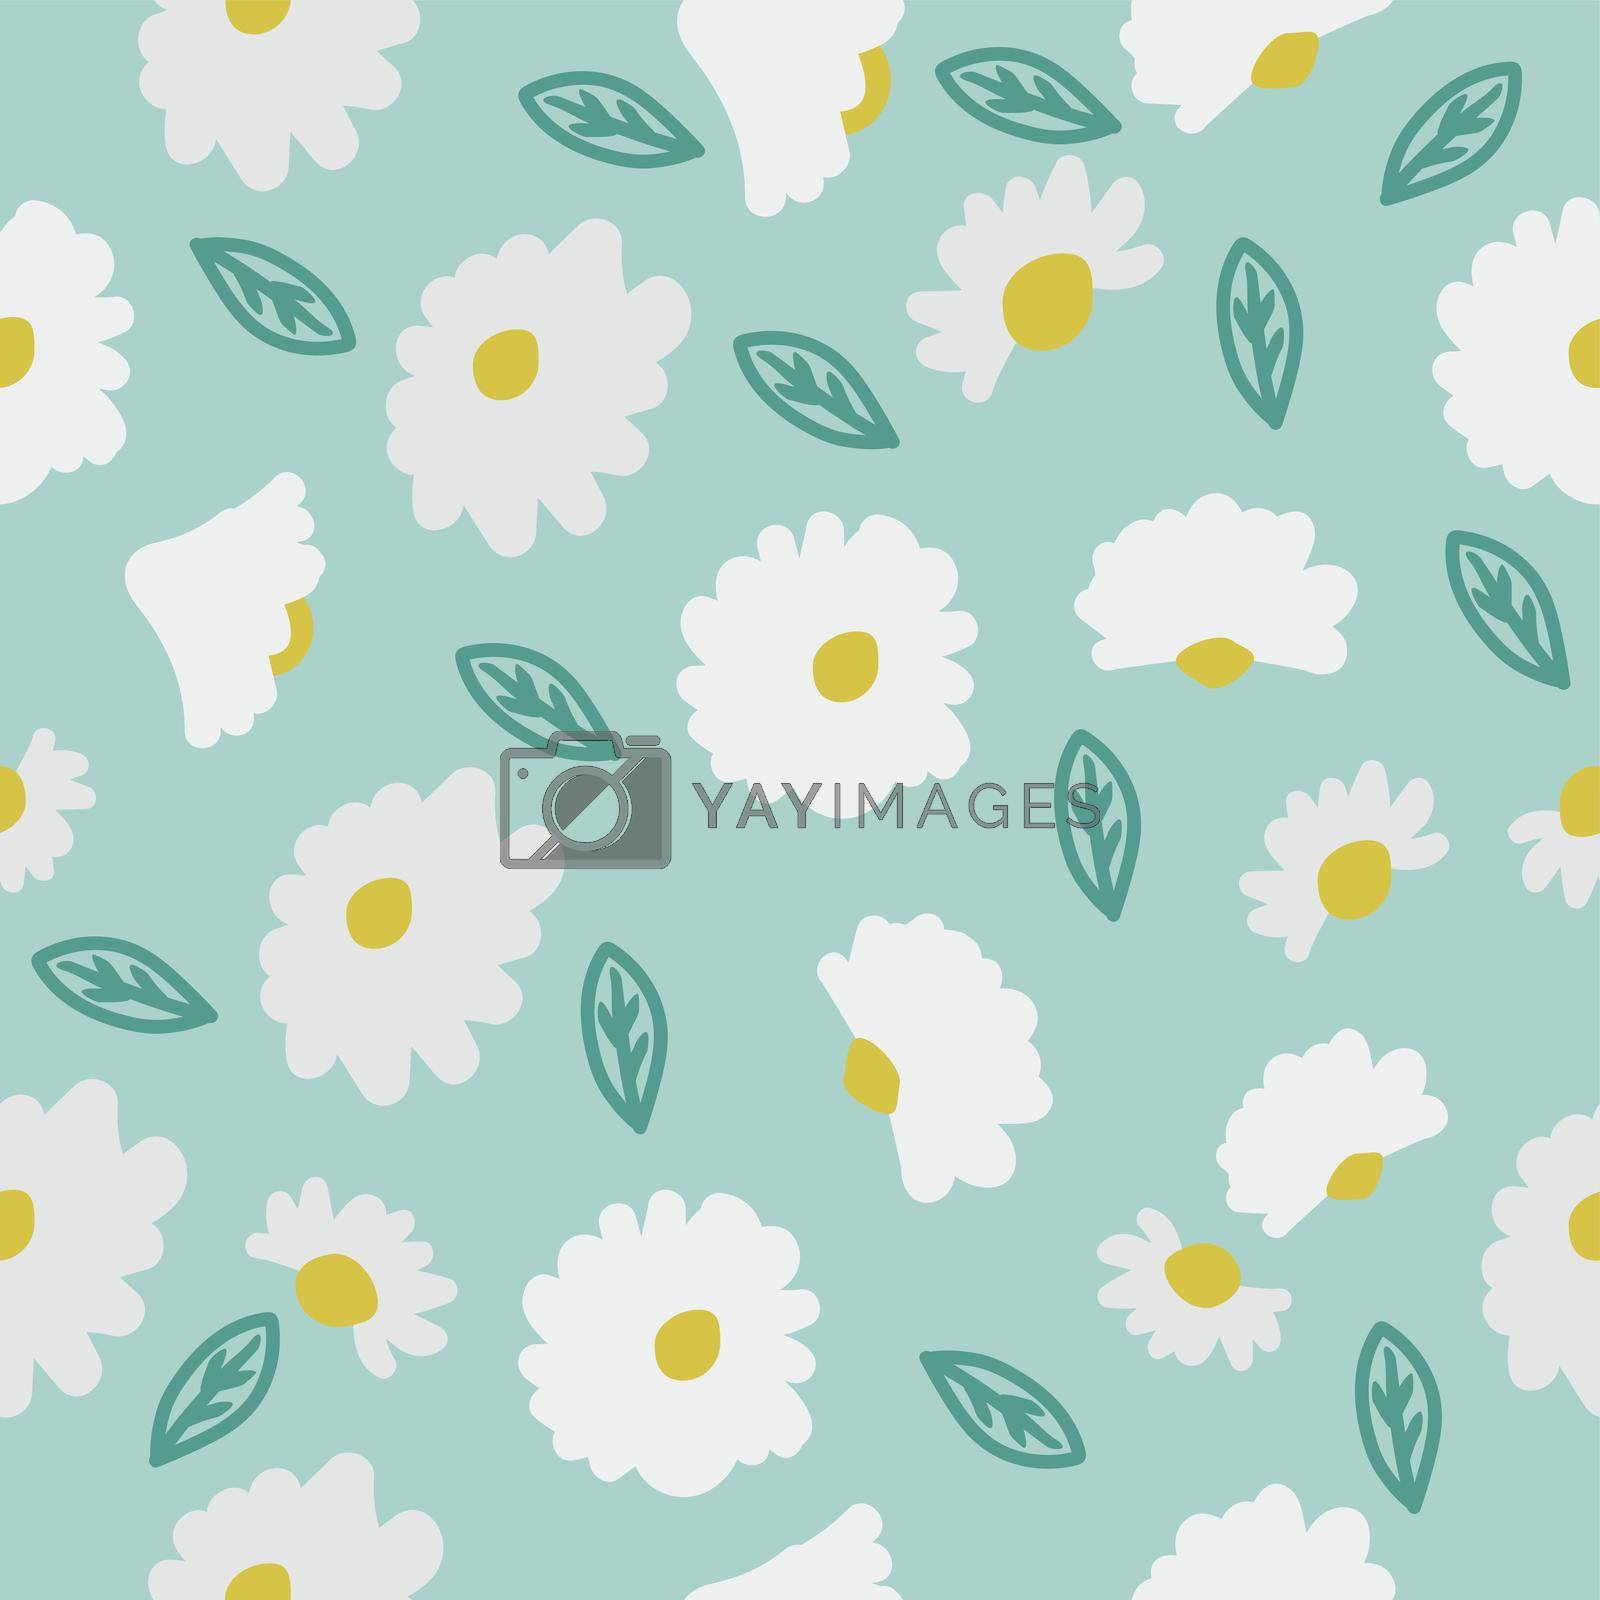 Royalty free image of abstract flowers Seamless pattern repeat wallpaper by focus_bell